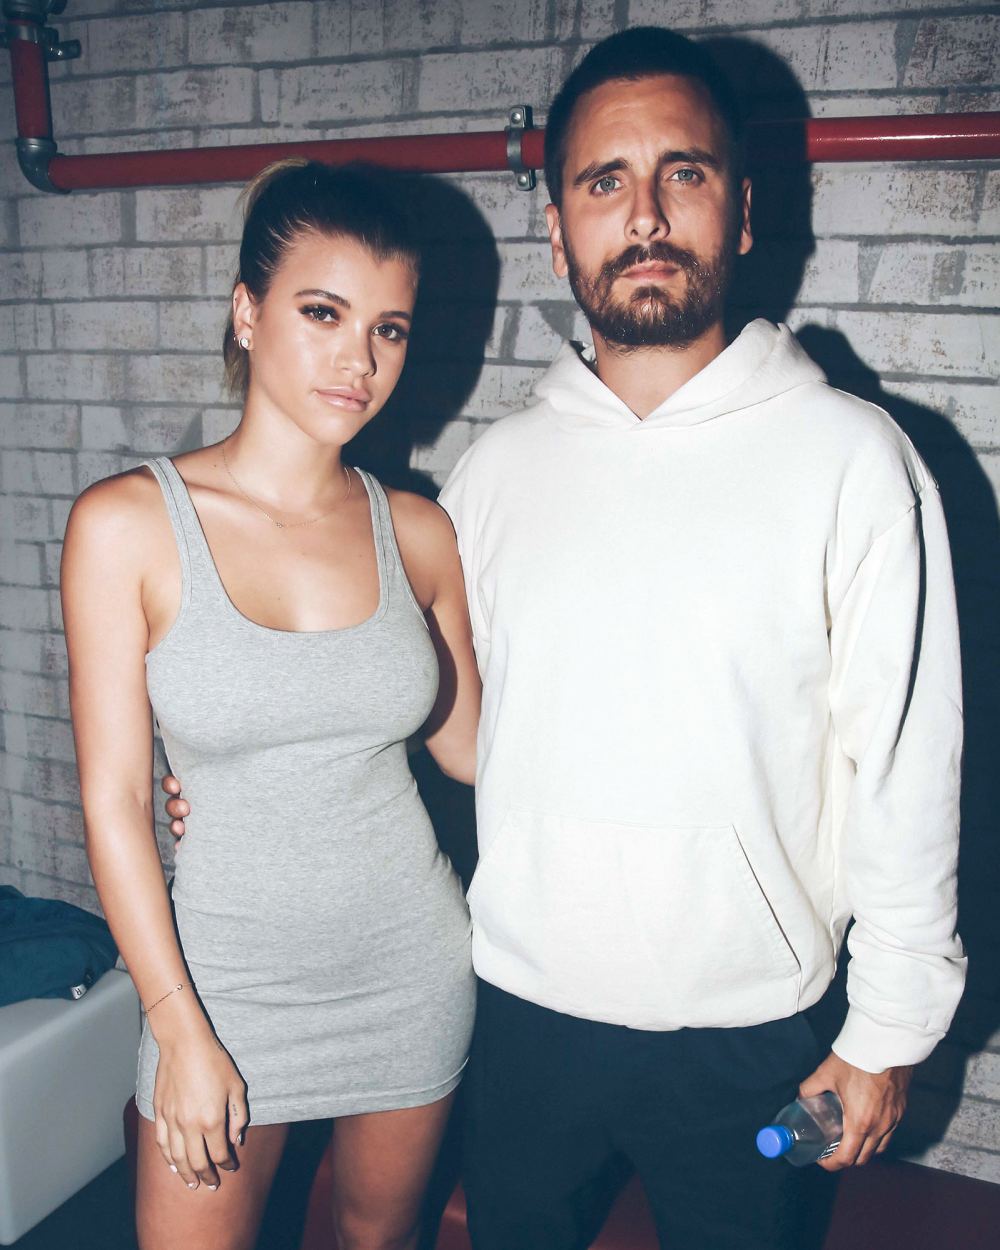 Sofia Richie Very Happy in Her Relationship With Scott Disick